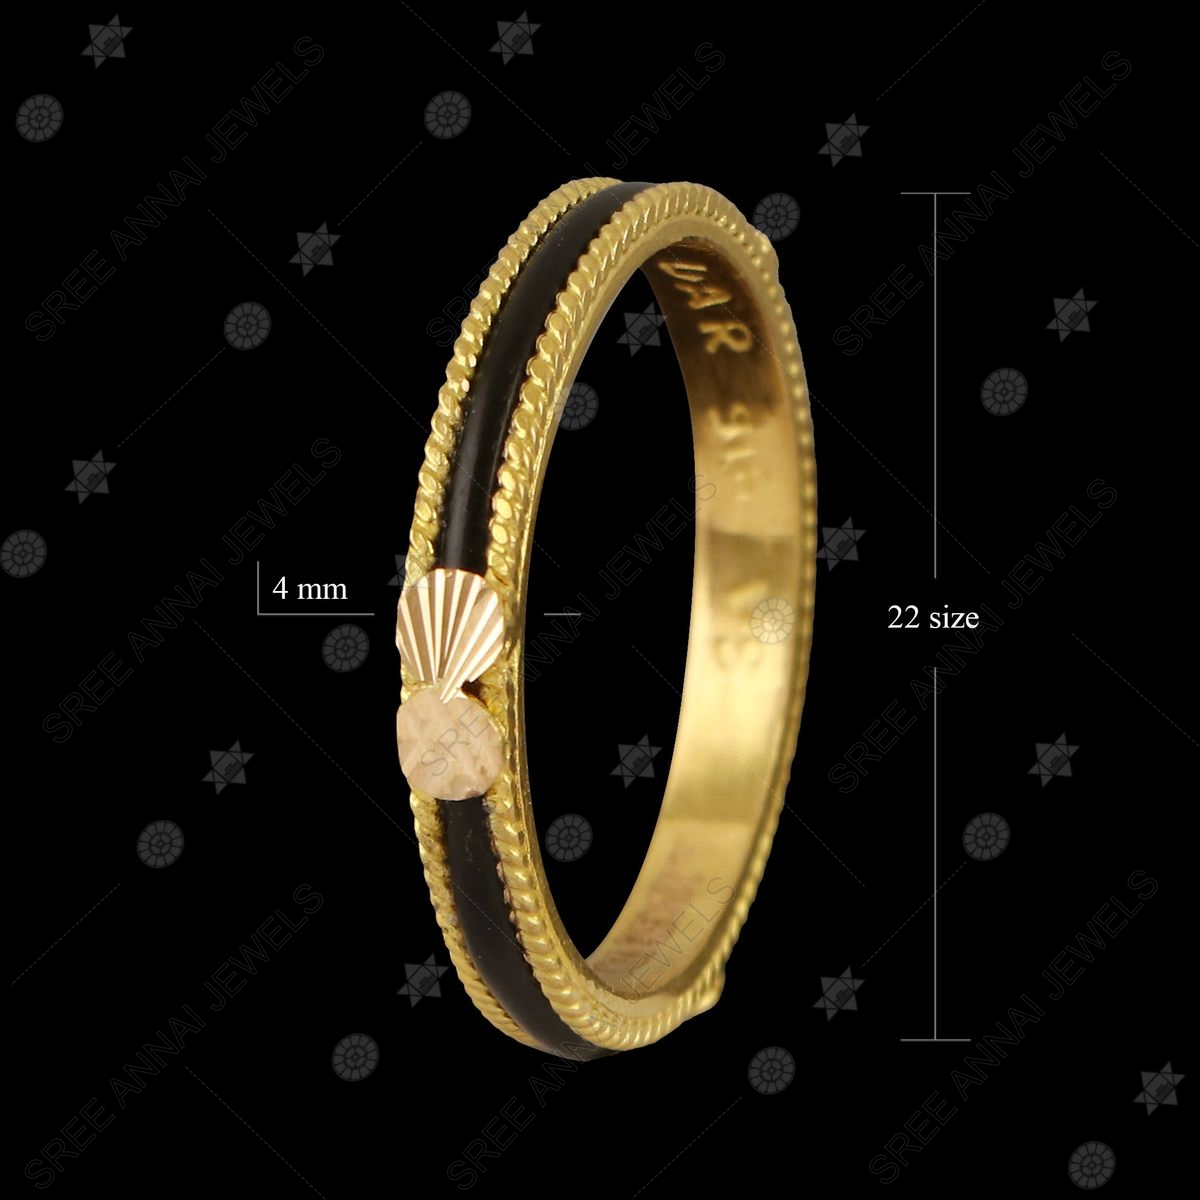 Does elephant hair ring (Yanai Mudi Ring) have some kind of power? -  letsdiskuss